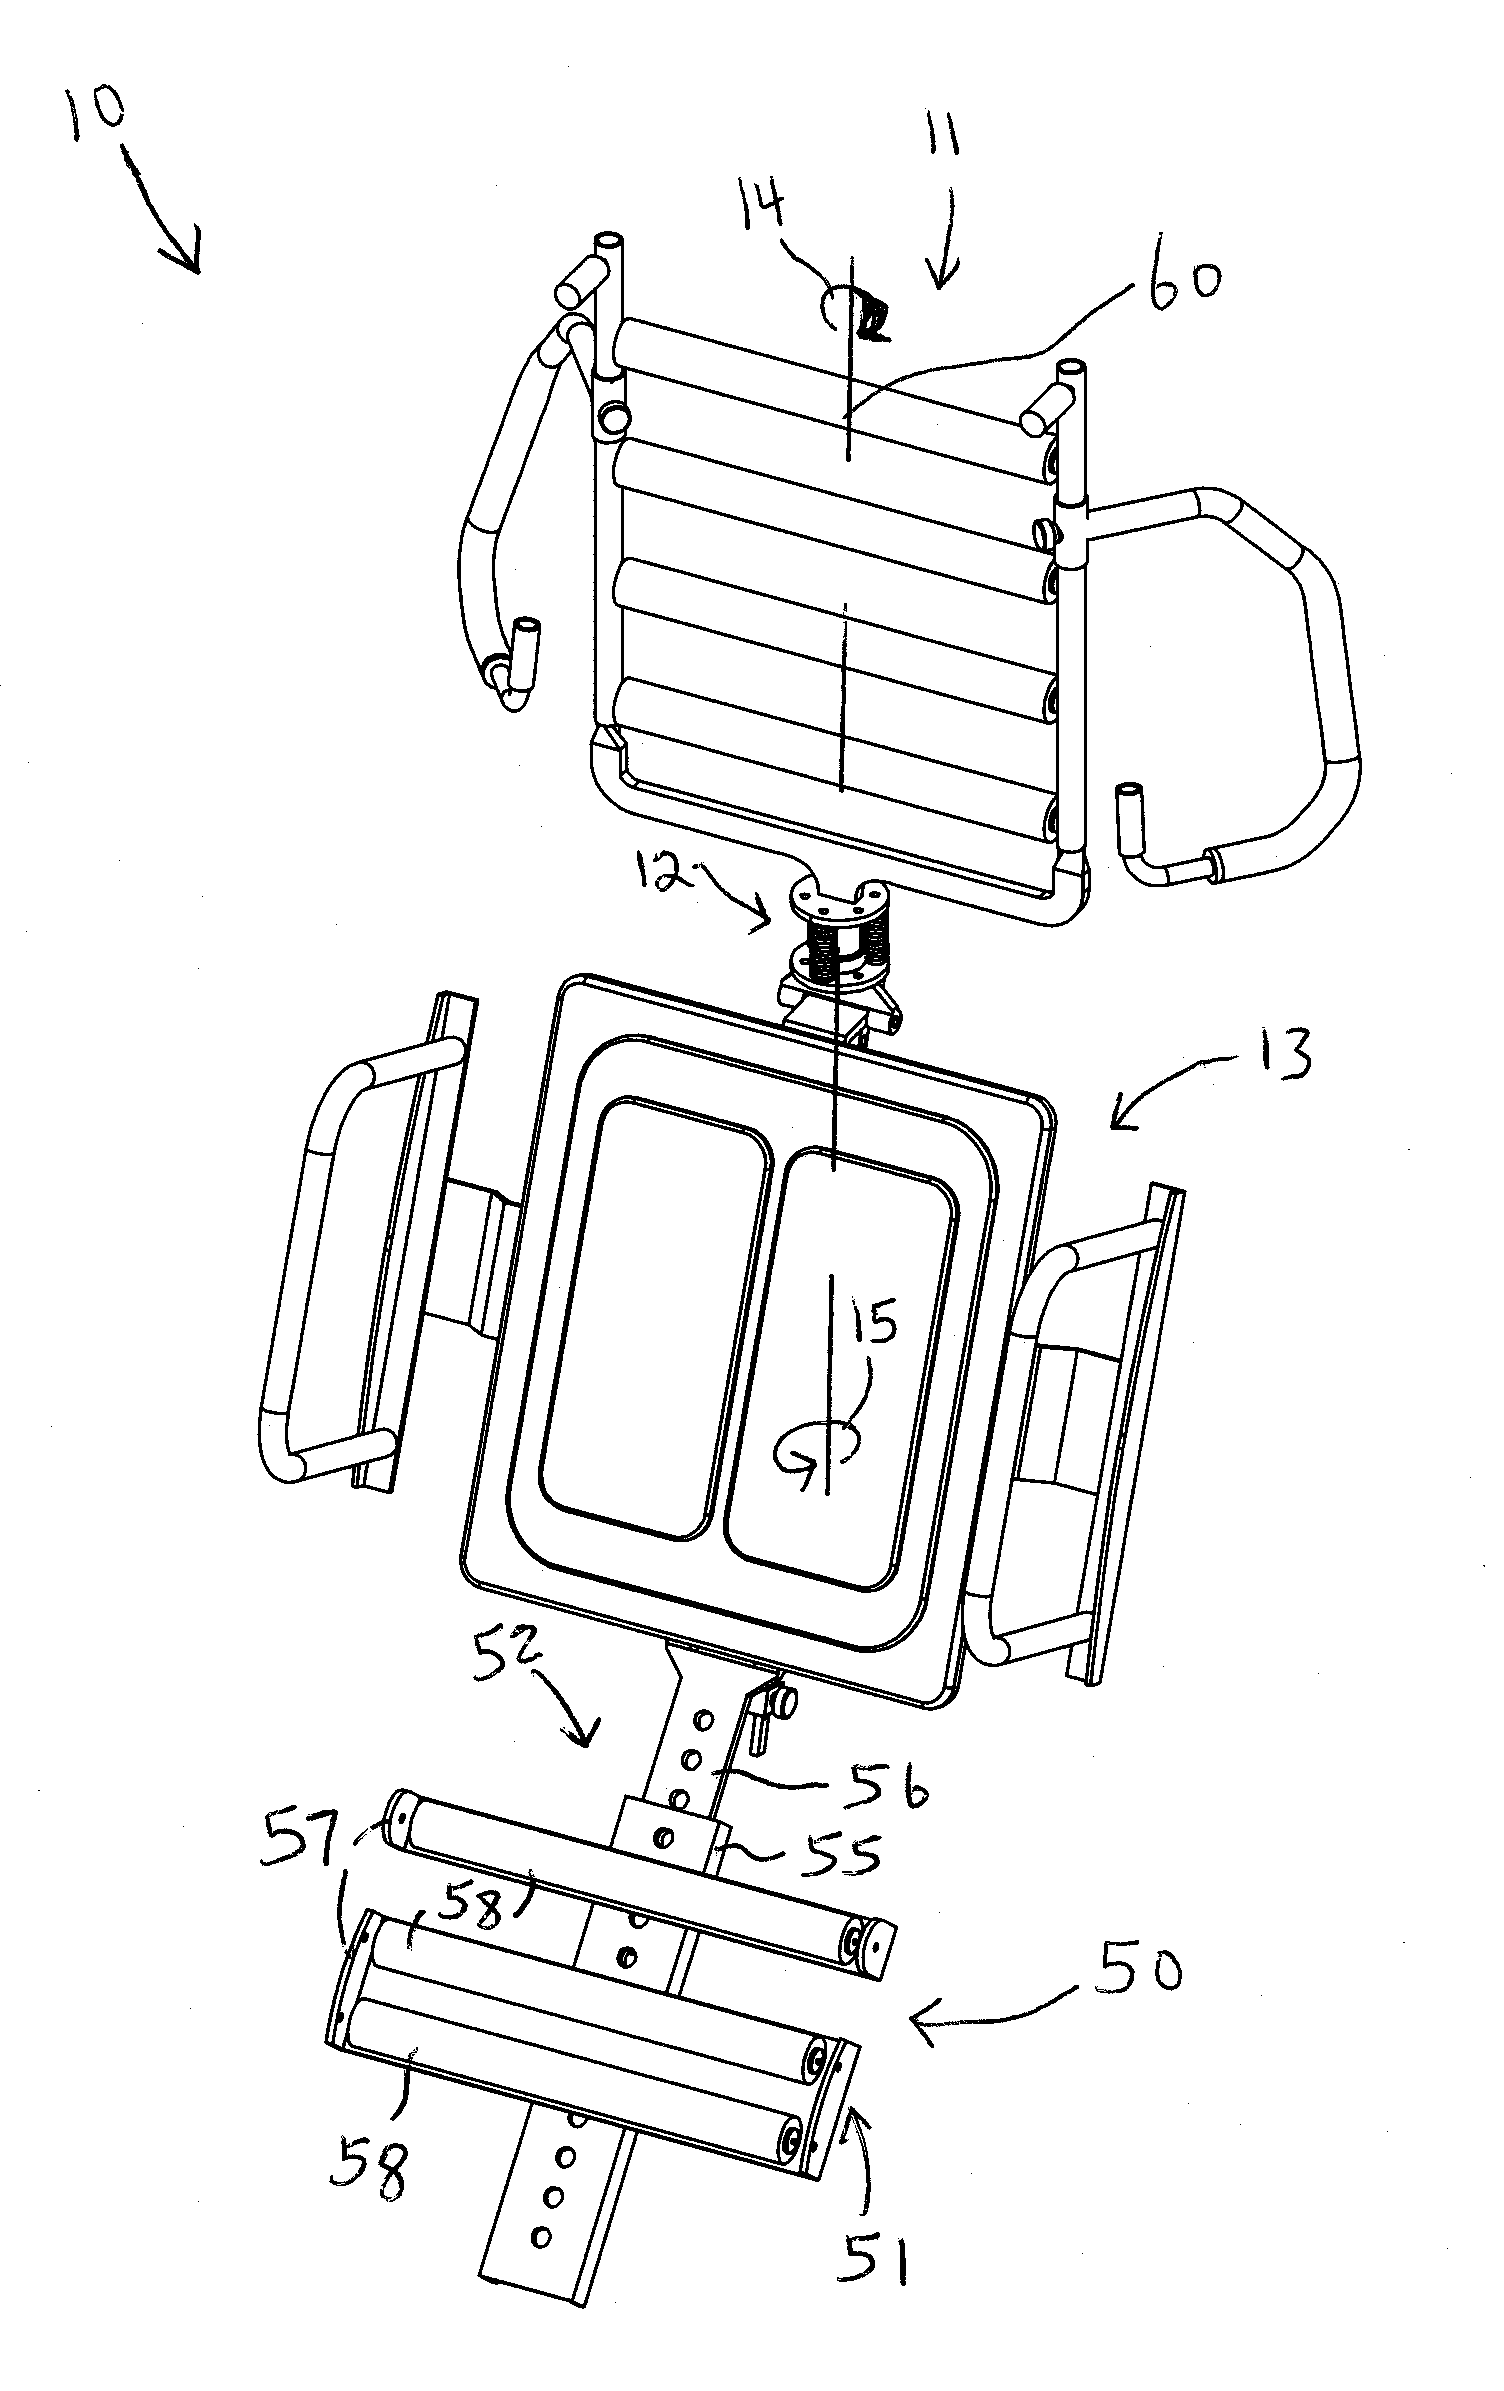 Multi-functional and collapsible exercise device and associated use thereof